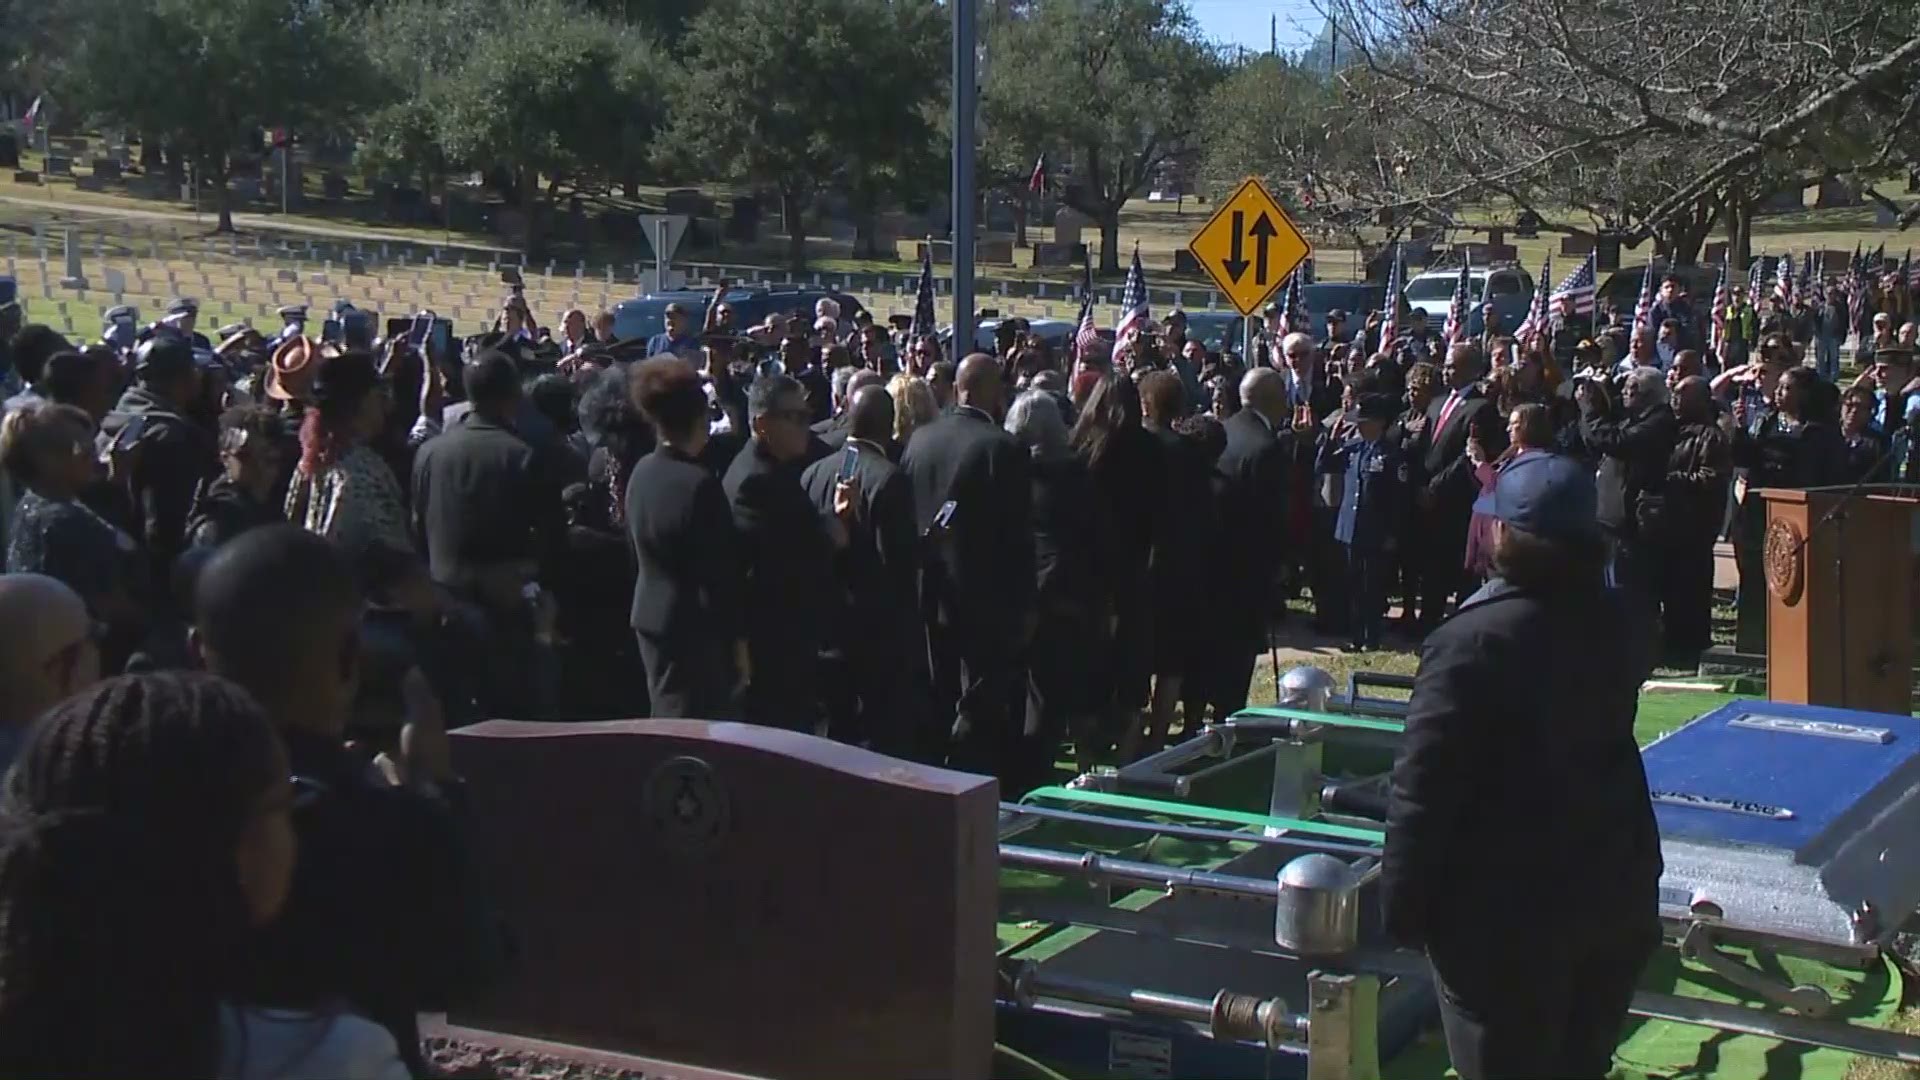 Richard Overton, who was America's oldest WWII veteran, was laid to rest Saturday afternoon at the Texas State Cemetery.